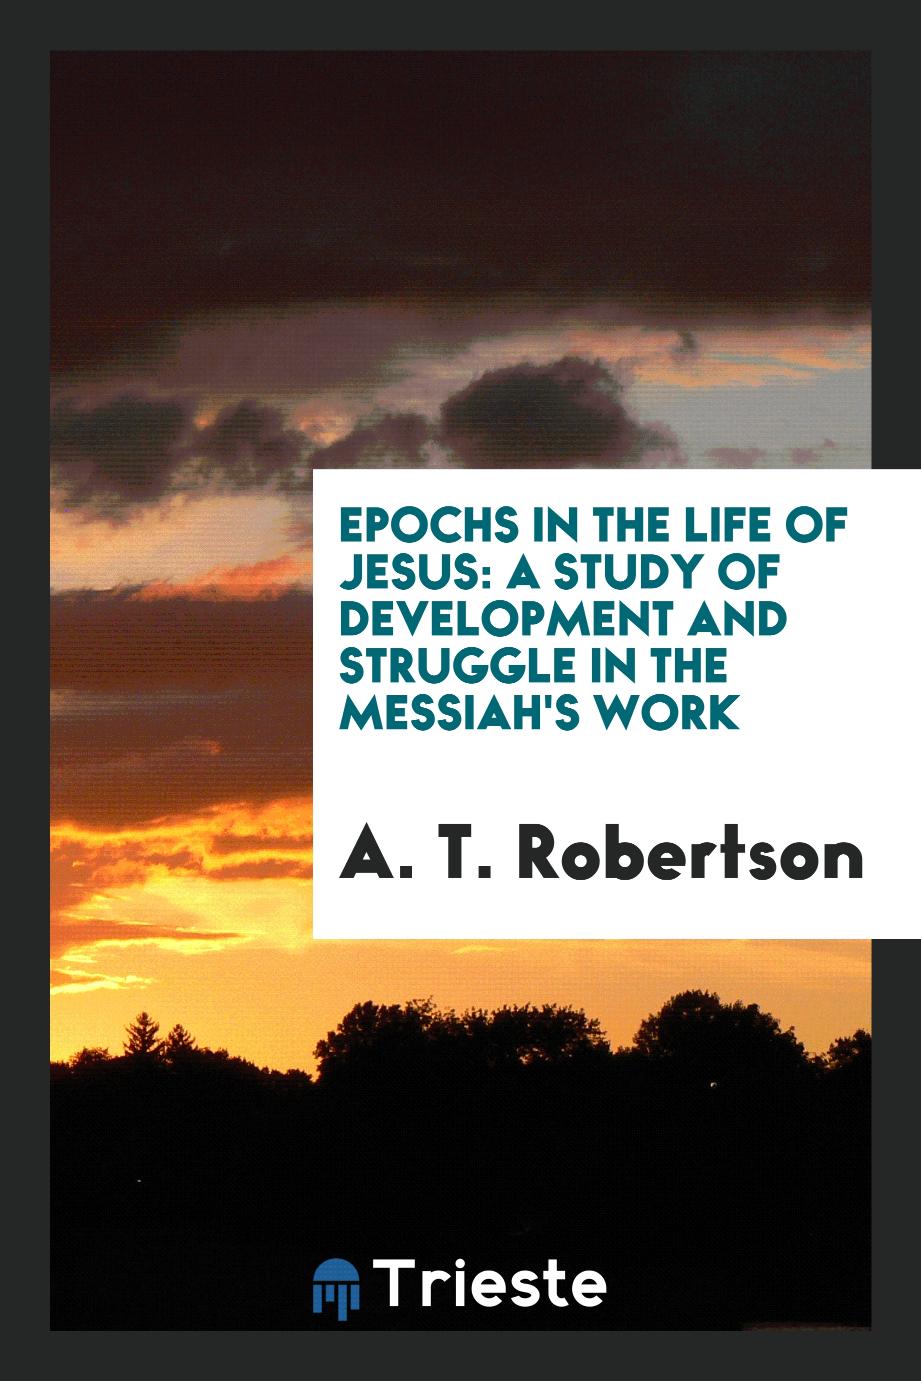 A. T. Robertson - Epochs in the Life of Jesus: A Study of Development and Struggle in the Messiah's Work